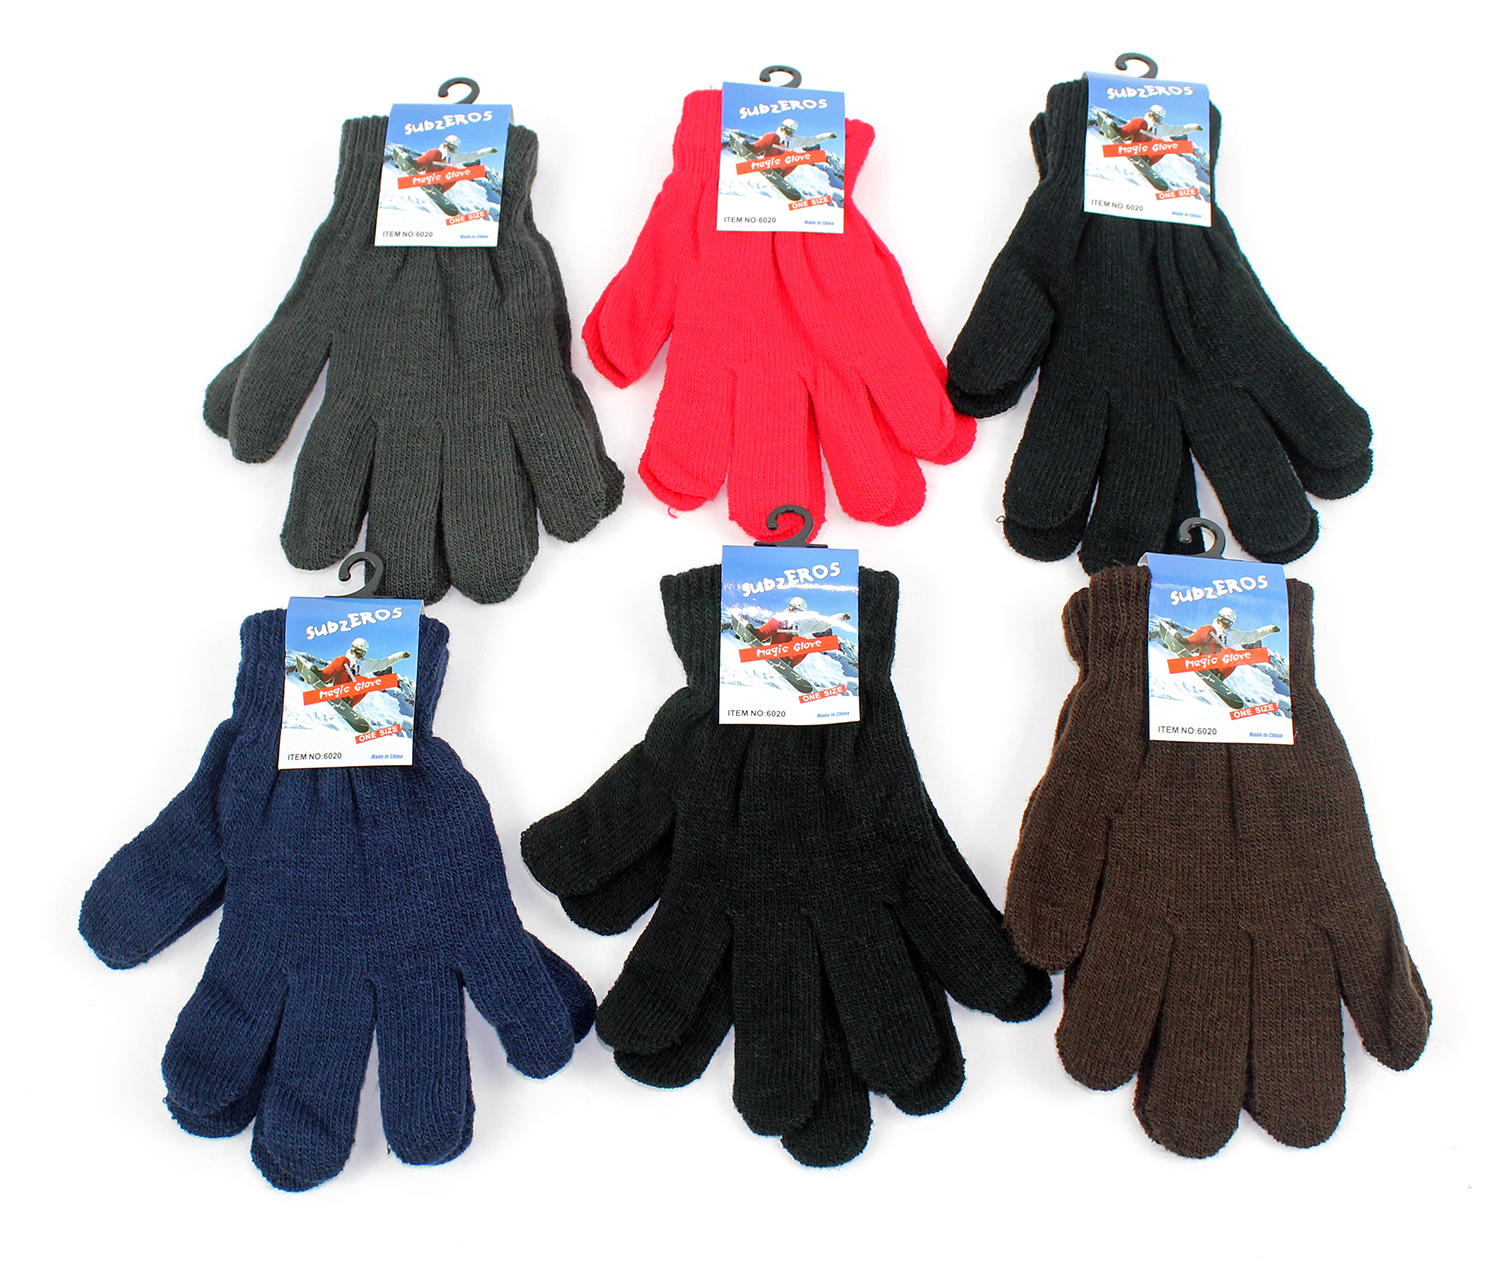 Adult Magic Stretch GLOVES - Assorted Colors